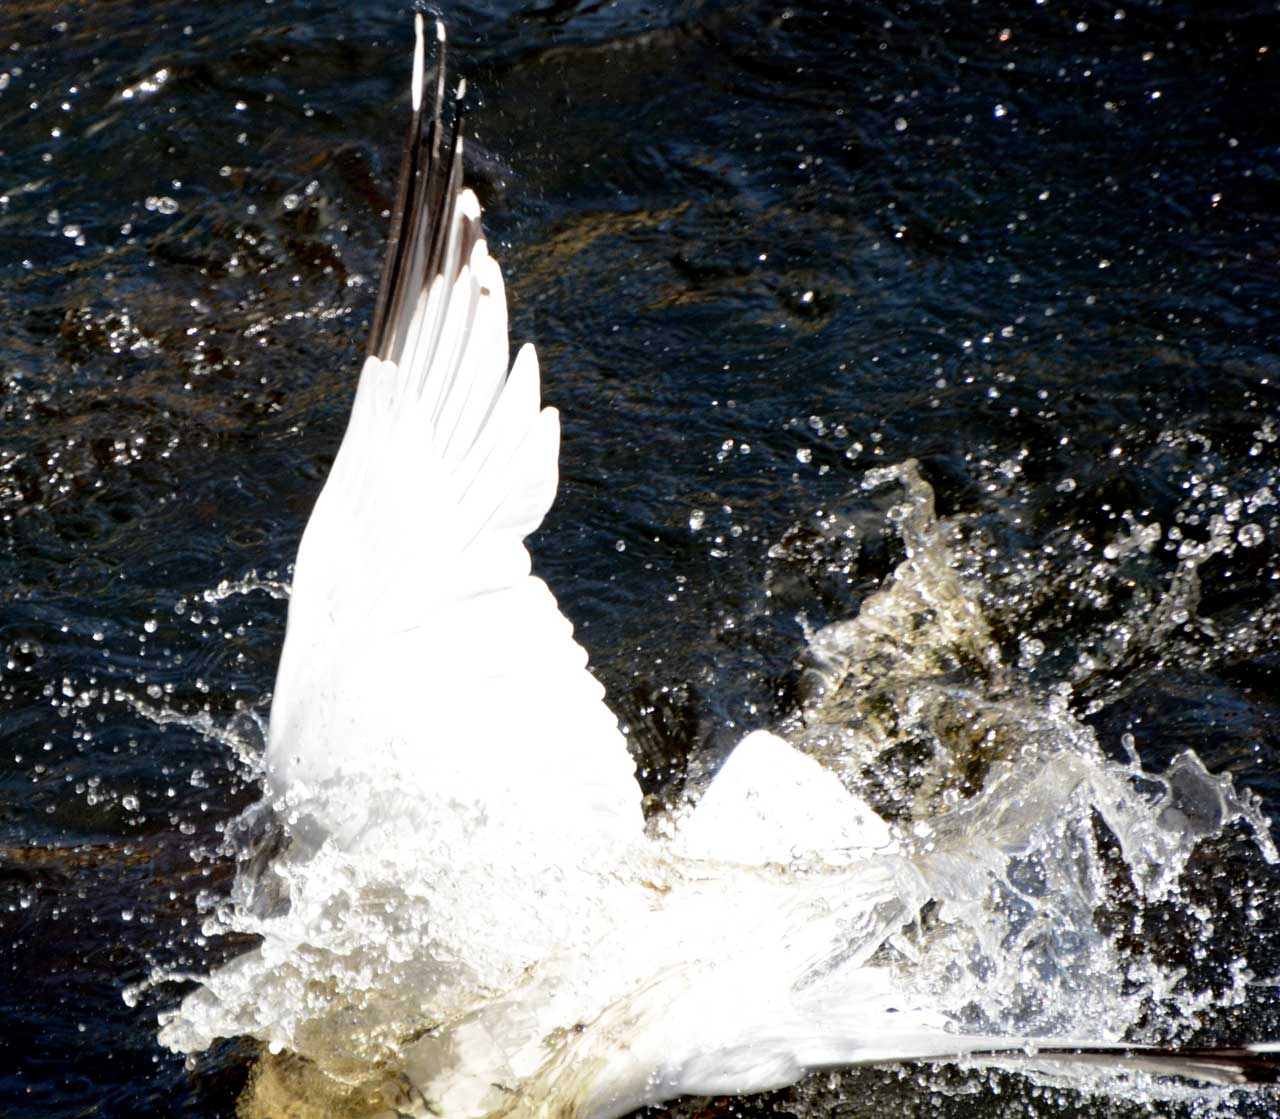 Photo: This Wick Seagull Had a Tasty Young Salmon